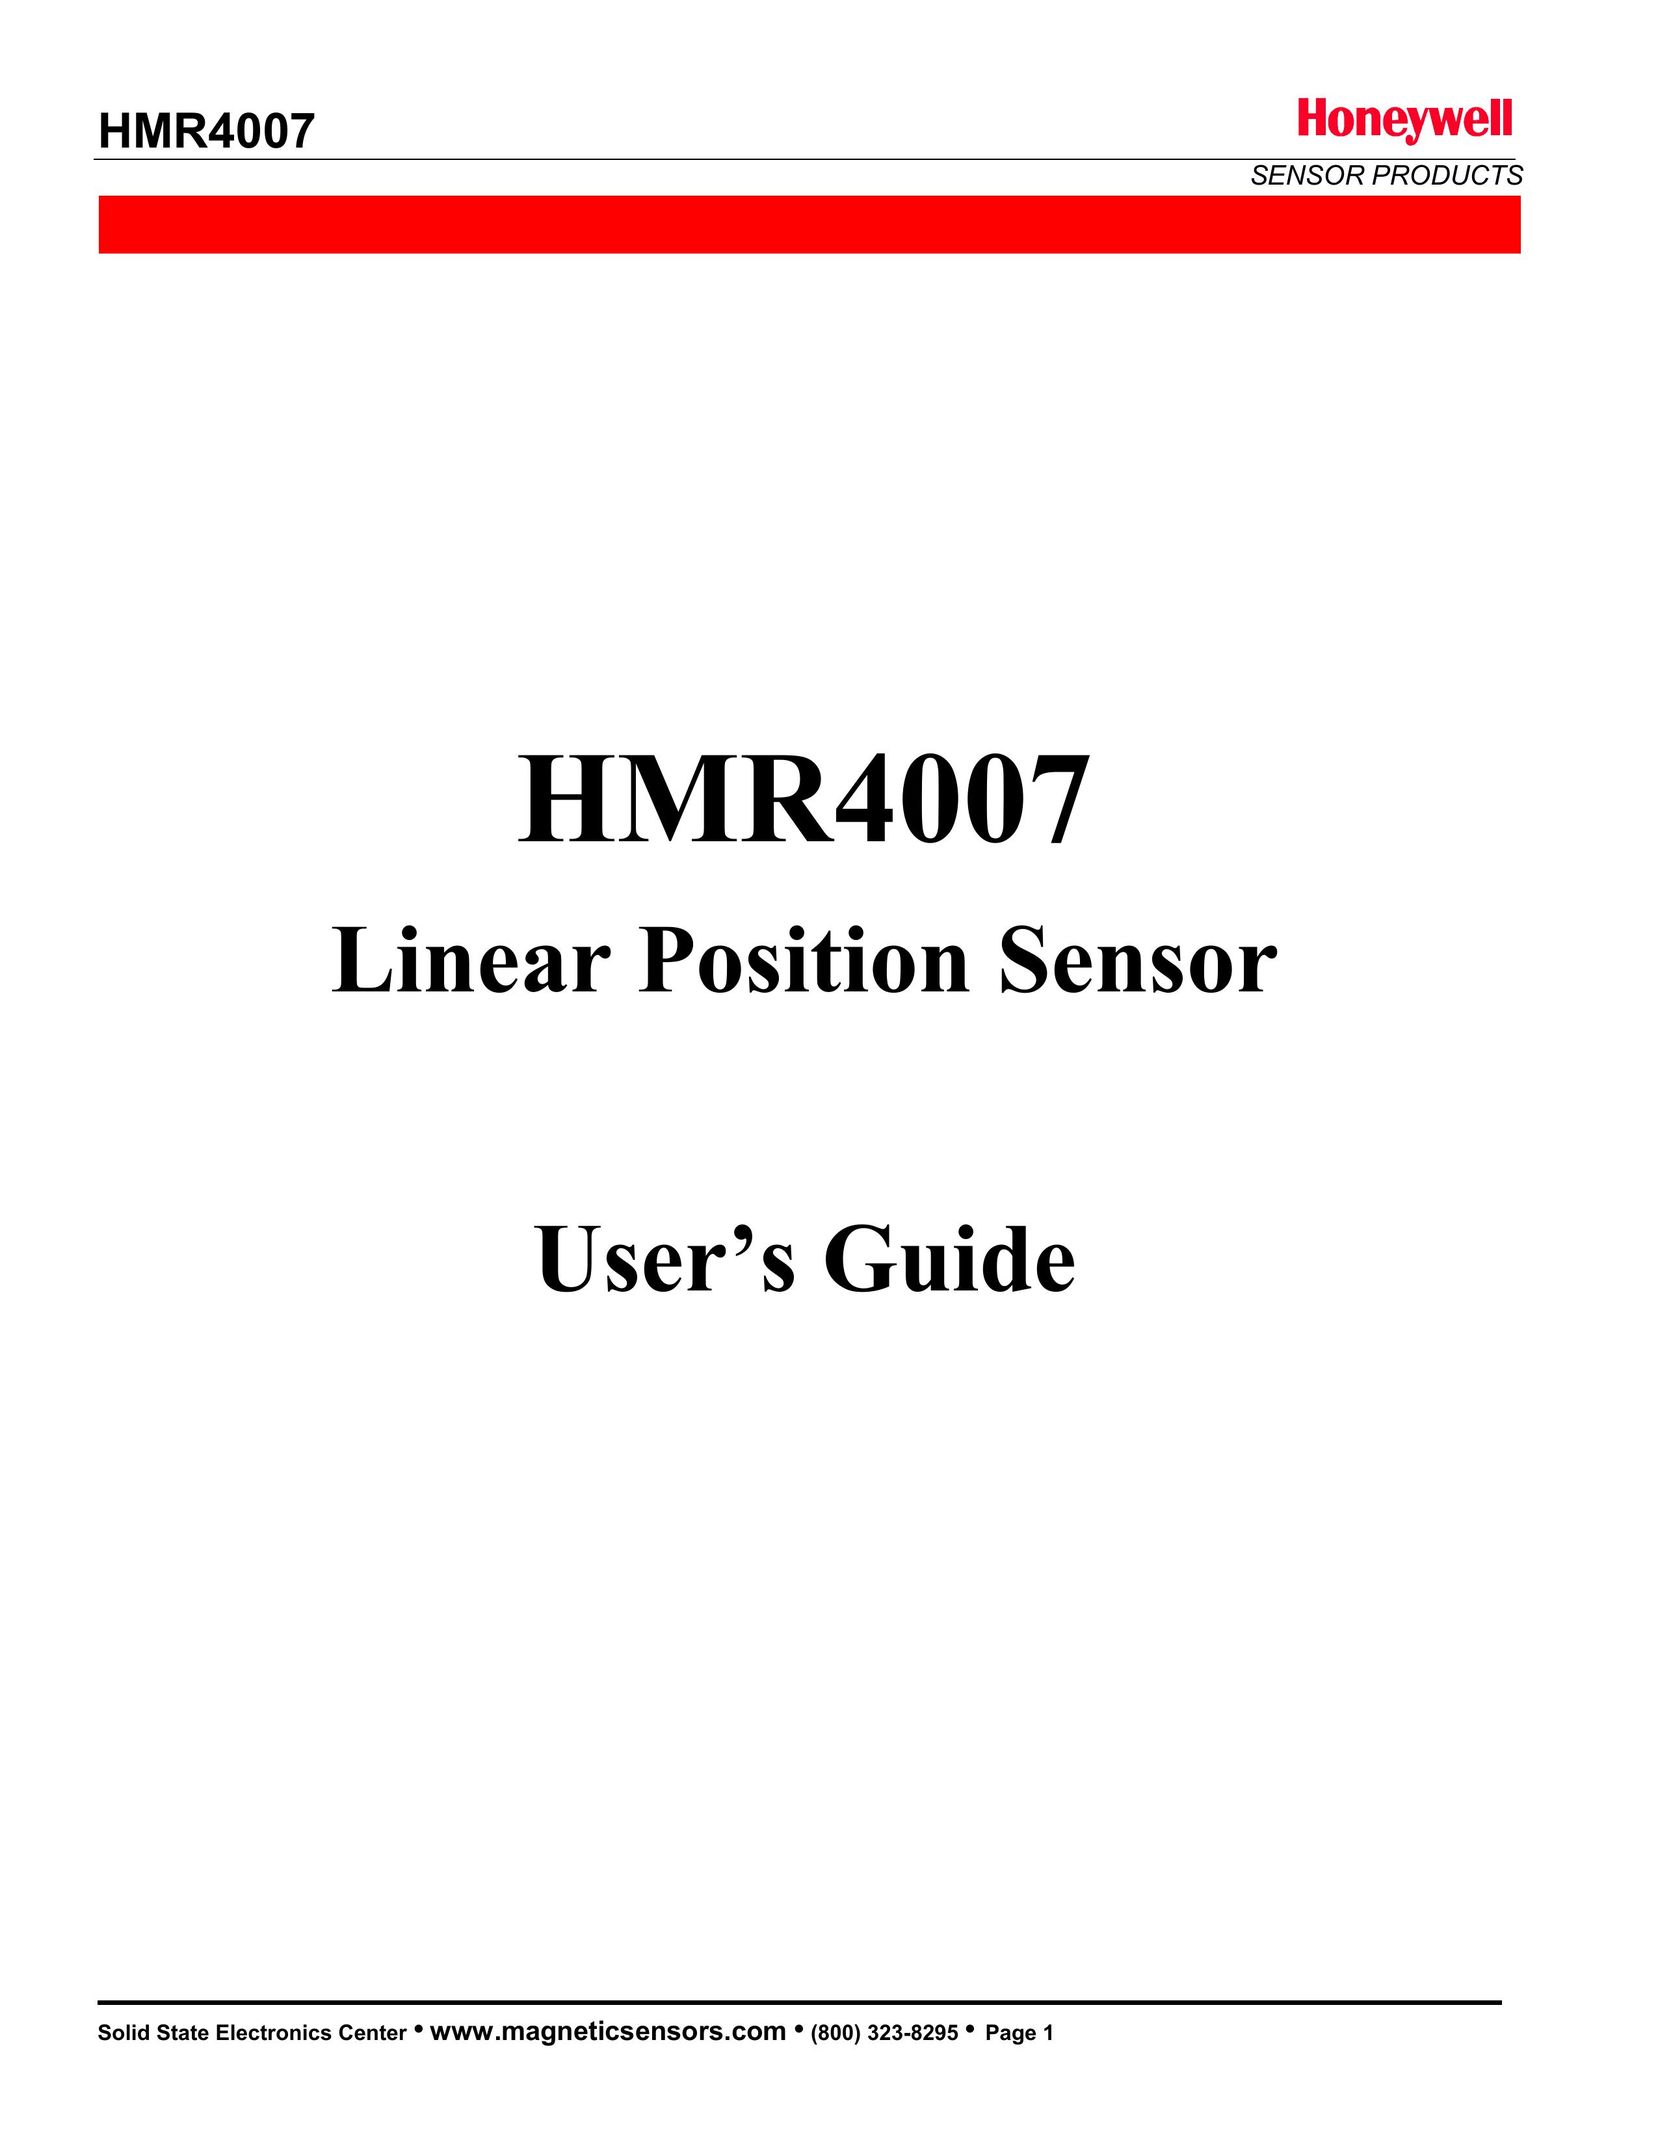 Honeywell HMR4007 Home Safety Product User Manual